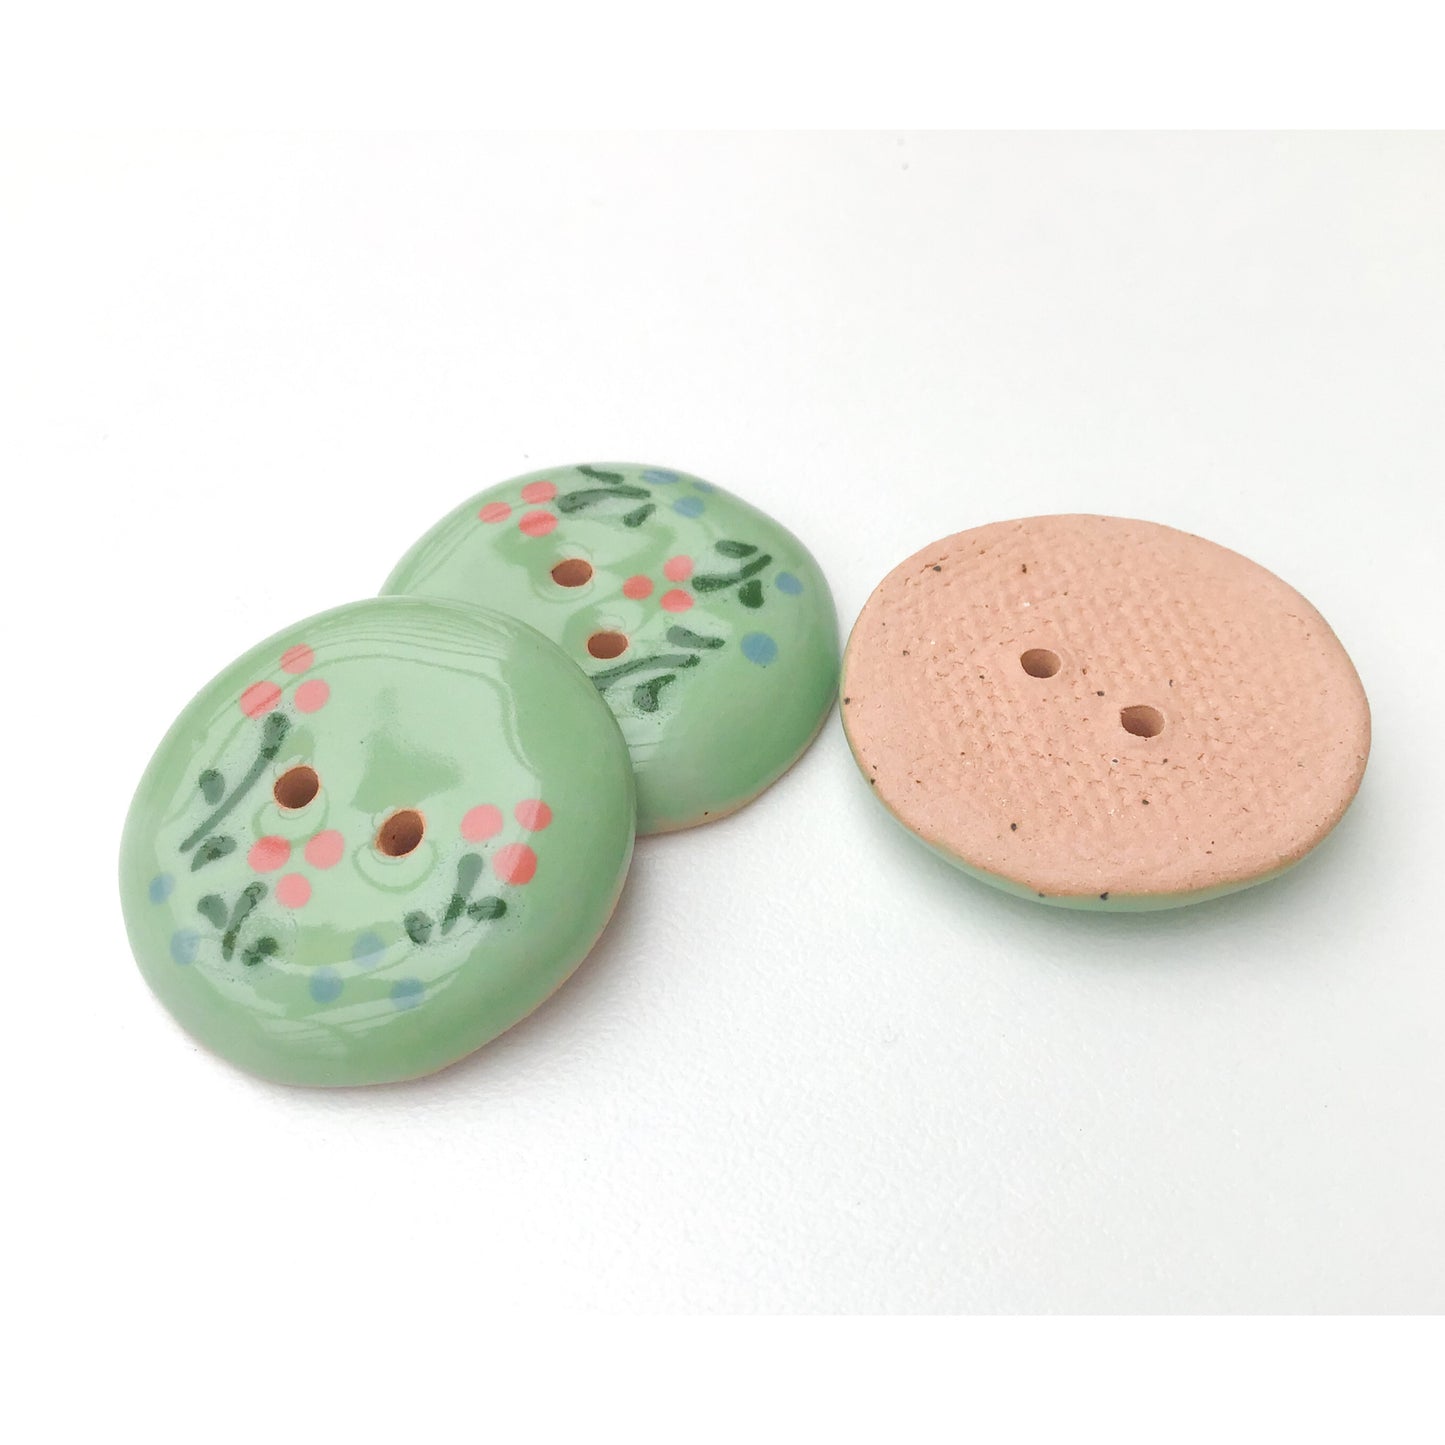 Pastel Green Ceramic Button with Flowers - Clay Flower Button - 1 1/16"